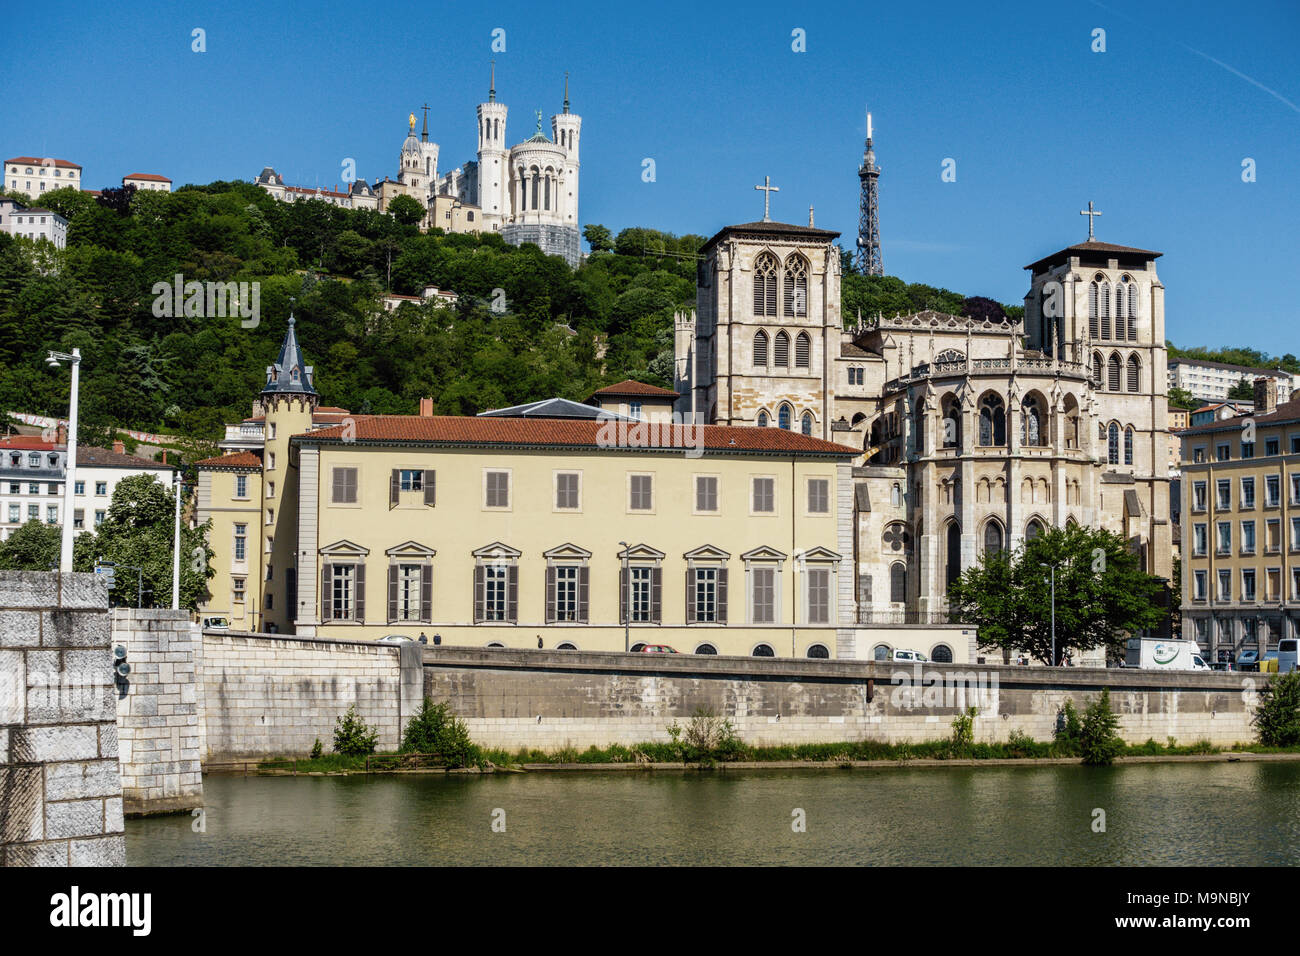 view of the Old Town, also known as “Vieux-Lyon”, from the river Saone, Lyon, France Stock Photo